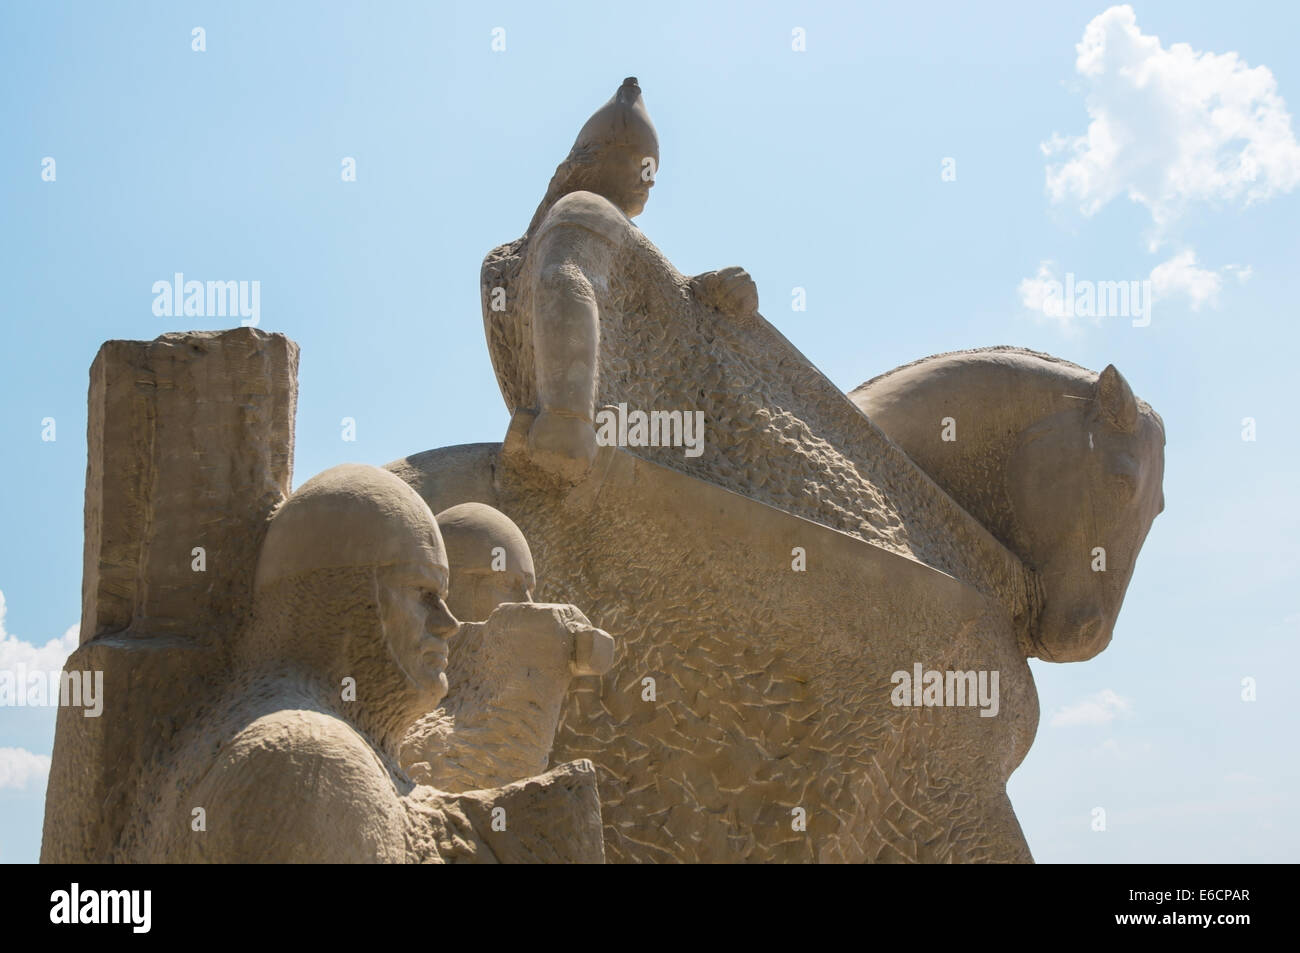 Boleslaw III Wrymouth Monument in Plock Poland. Opened in 2012 at the ...